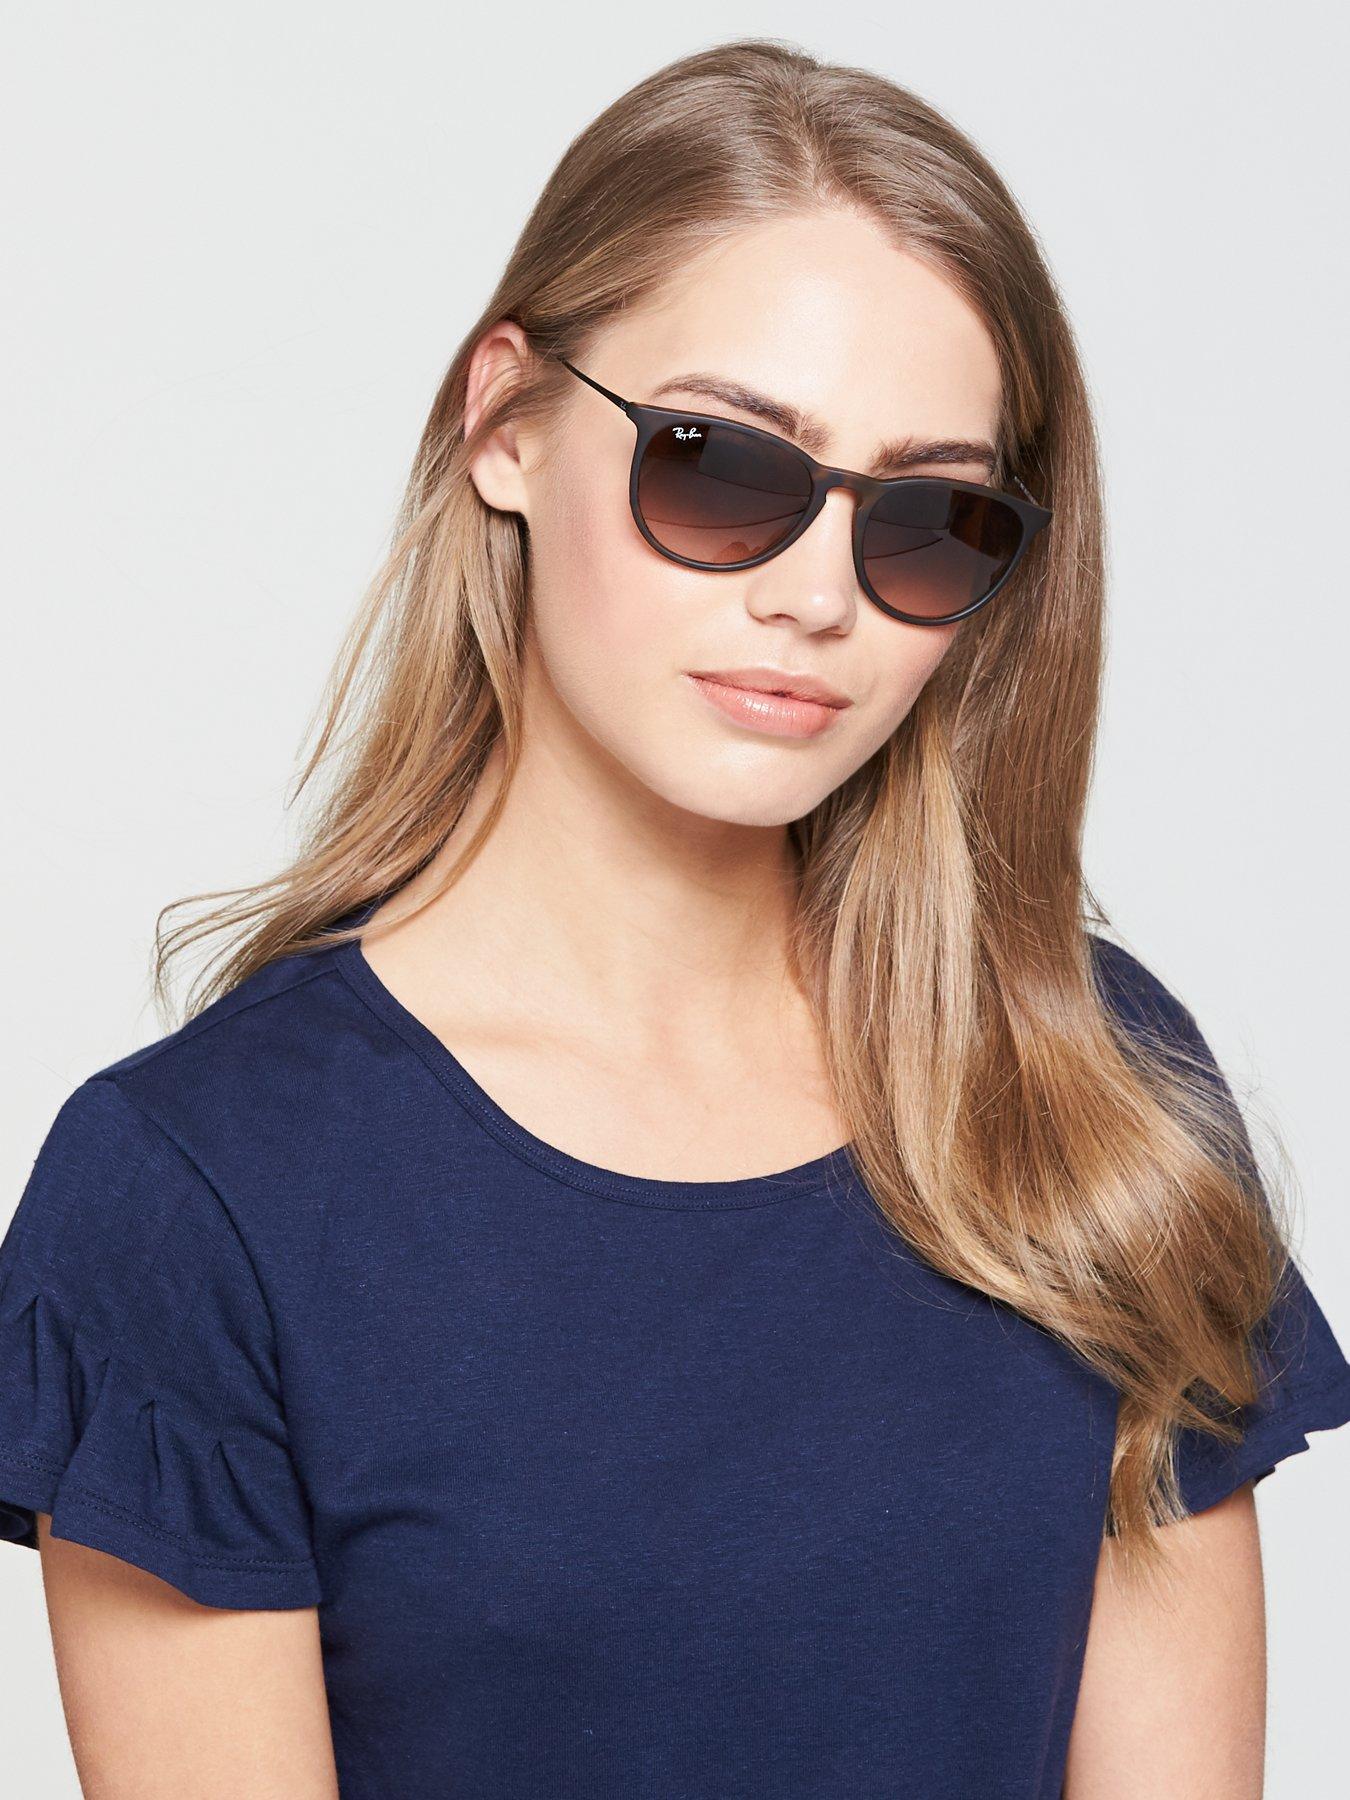 Tommy Hilfiger Women's glasses TH 105, Red Frame $249